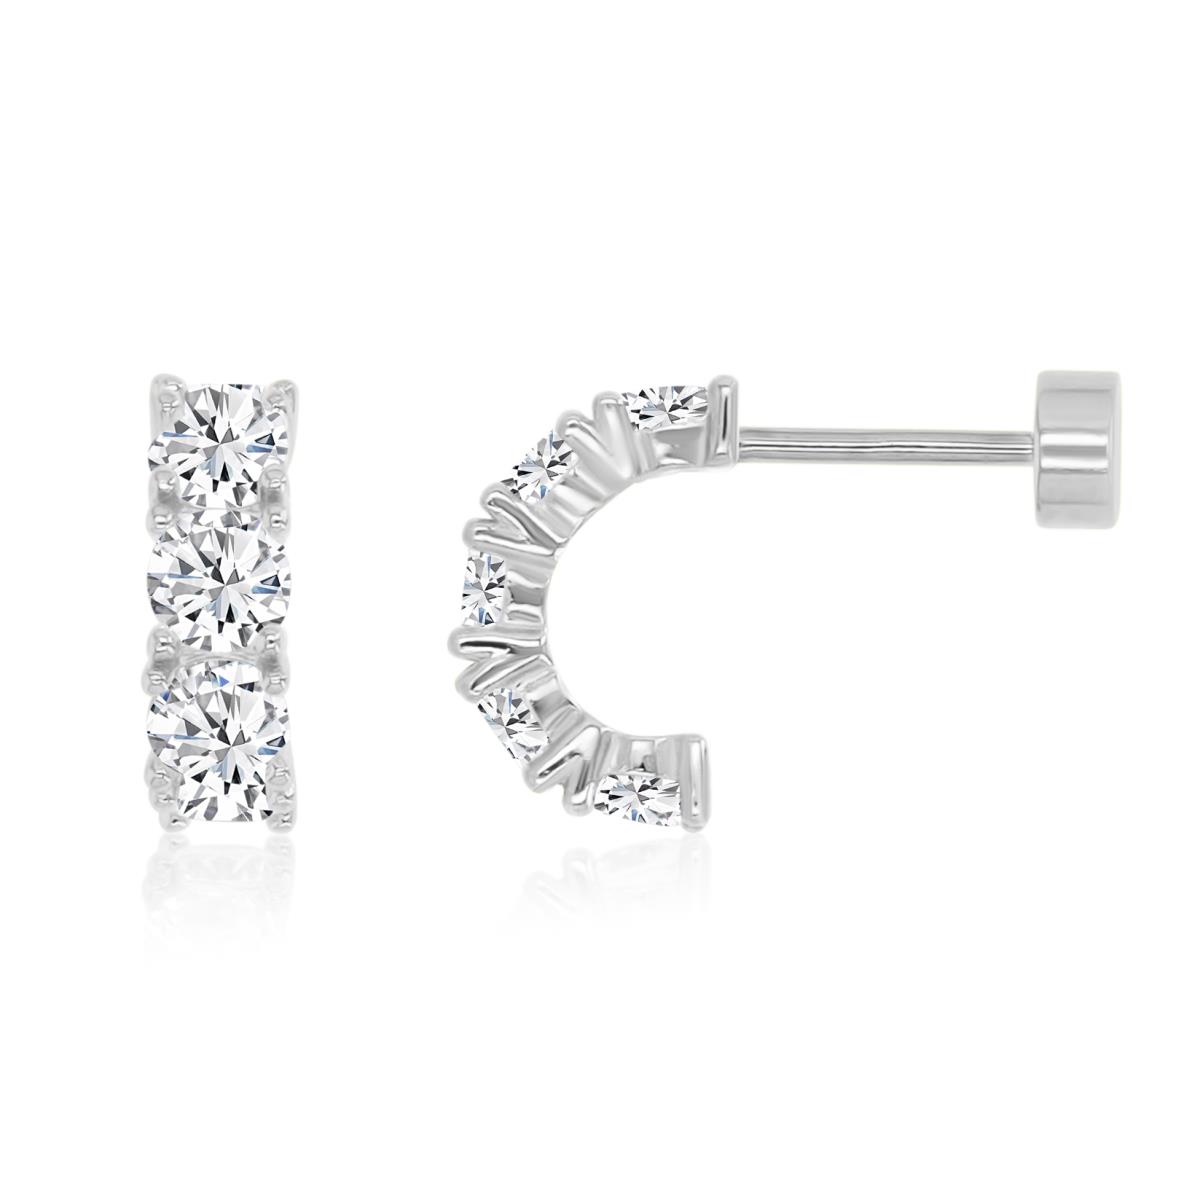 Sterling Silver Rhodium 8X3 Polished White CZ Pave C Flat Back Stud Earrings